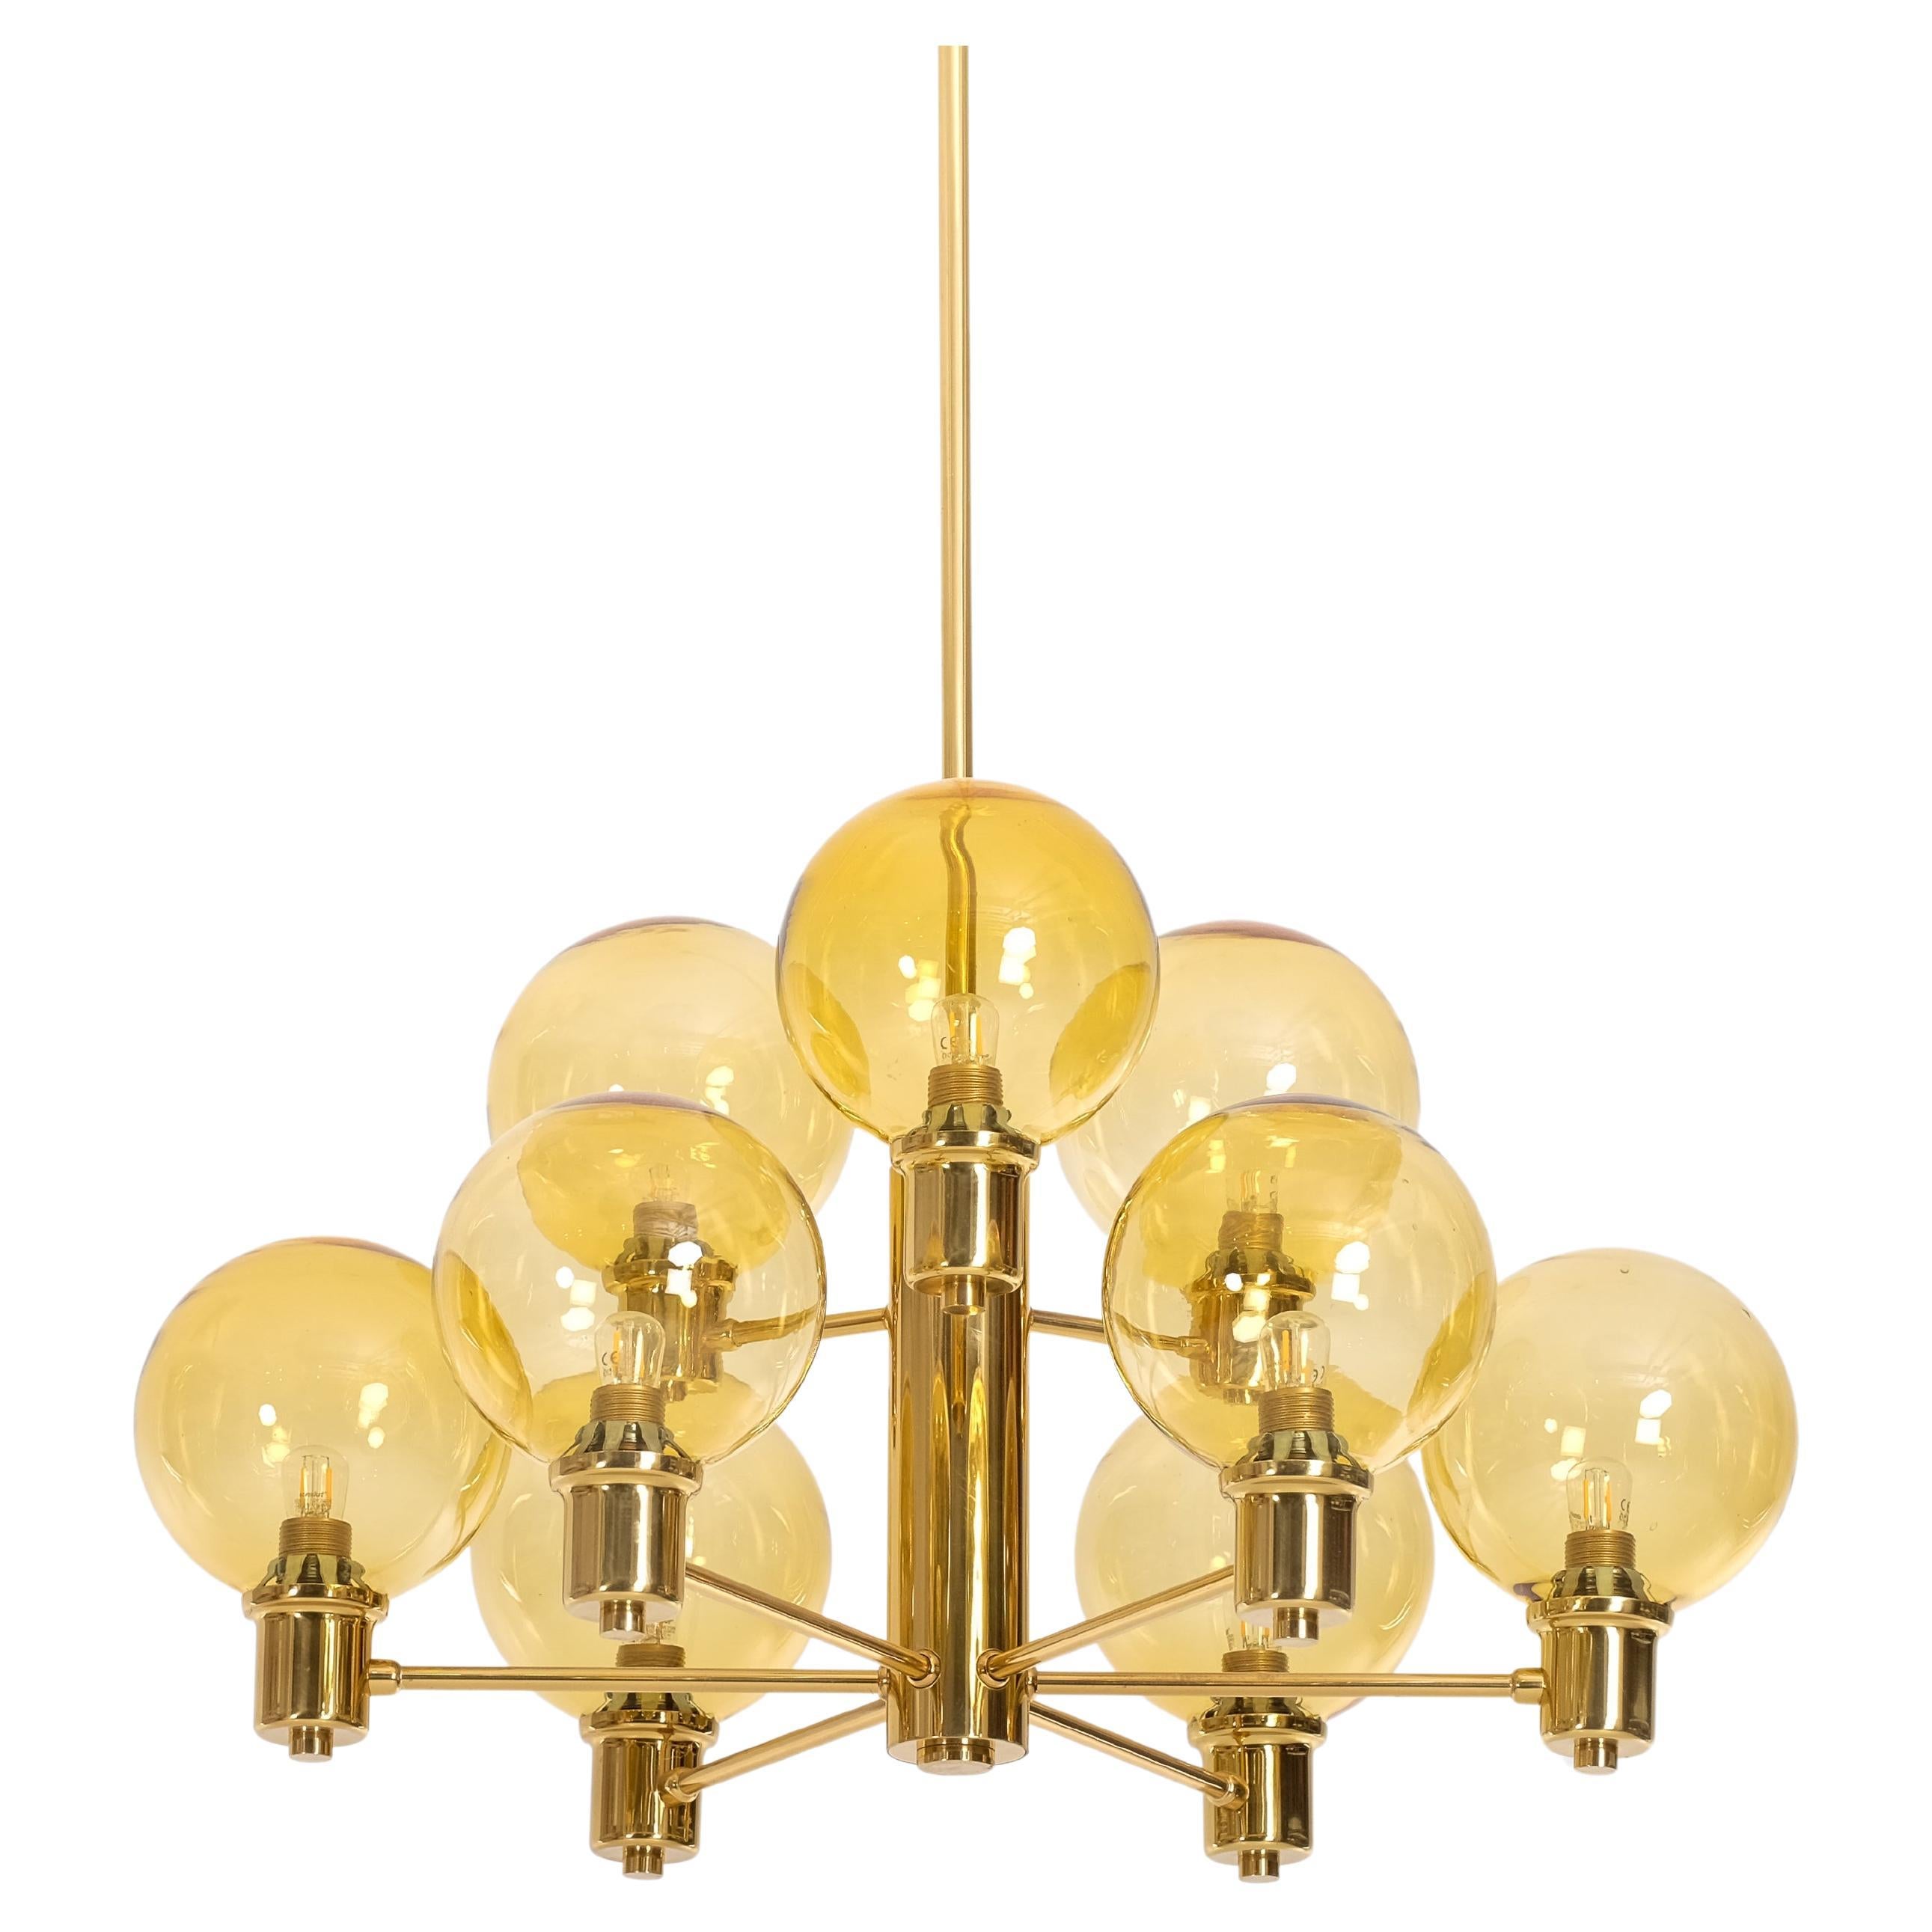 Set of 4 brass & glass chandeliers, Sweden, 1960s For Sale